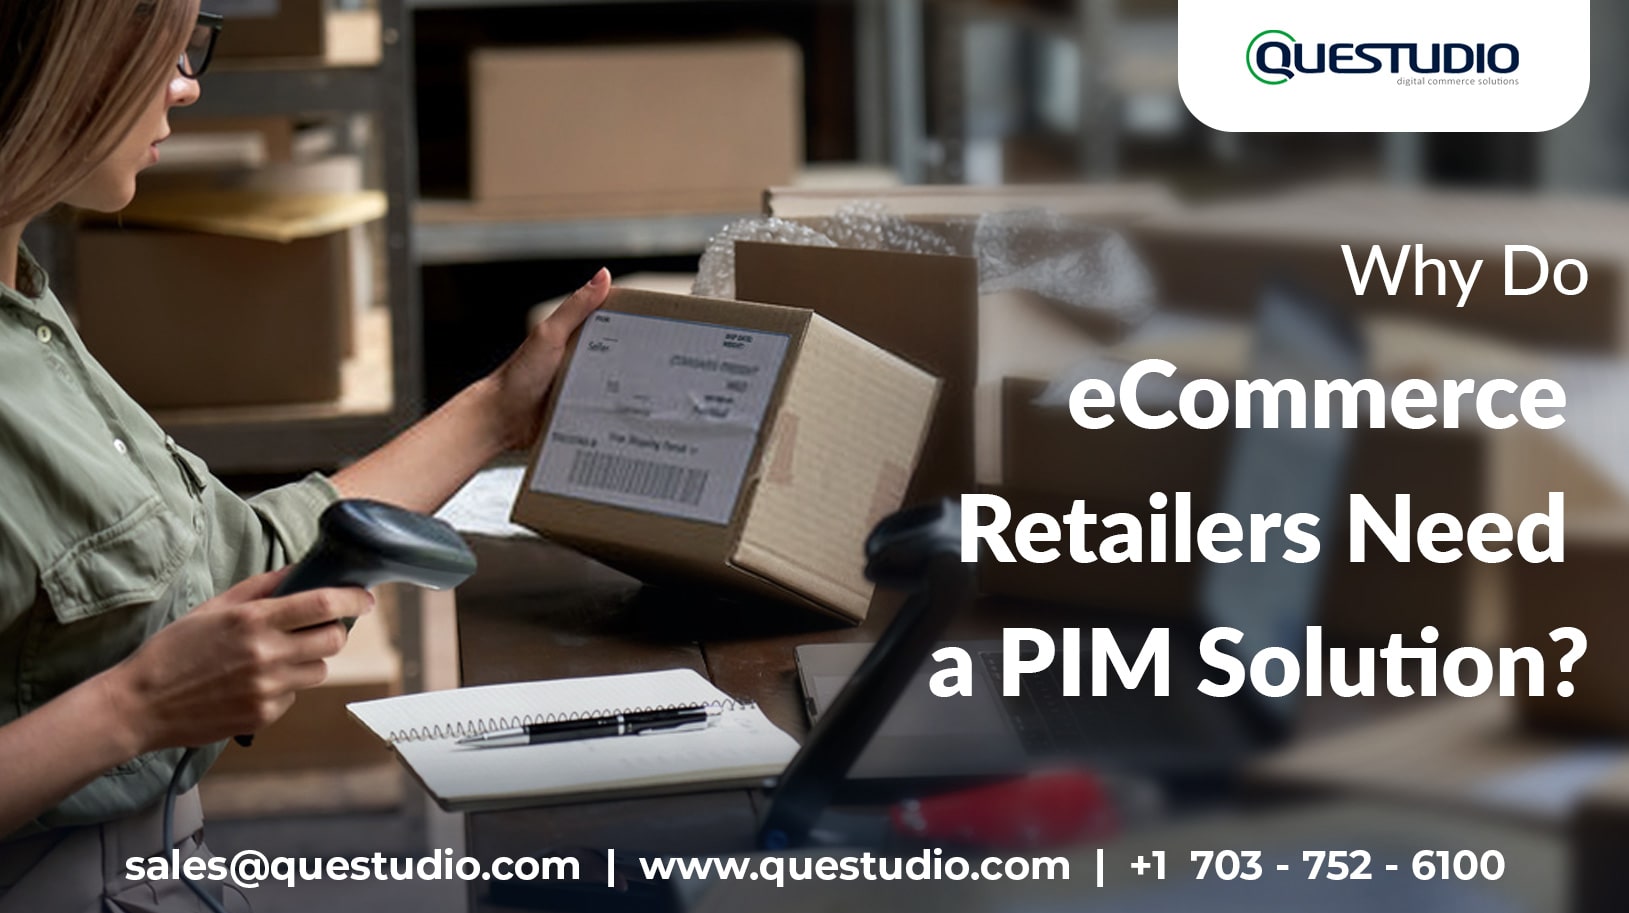 Why Do eCommerce Retailers Need a PIM Solution?